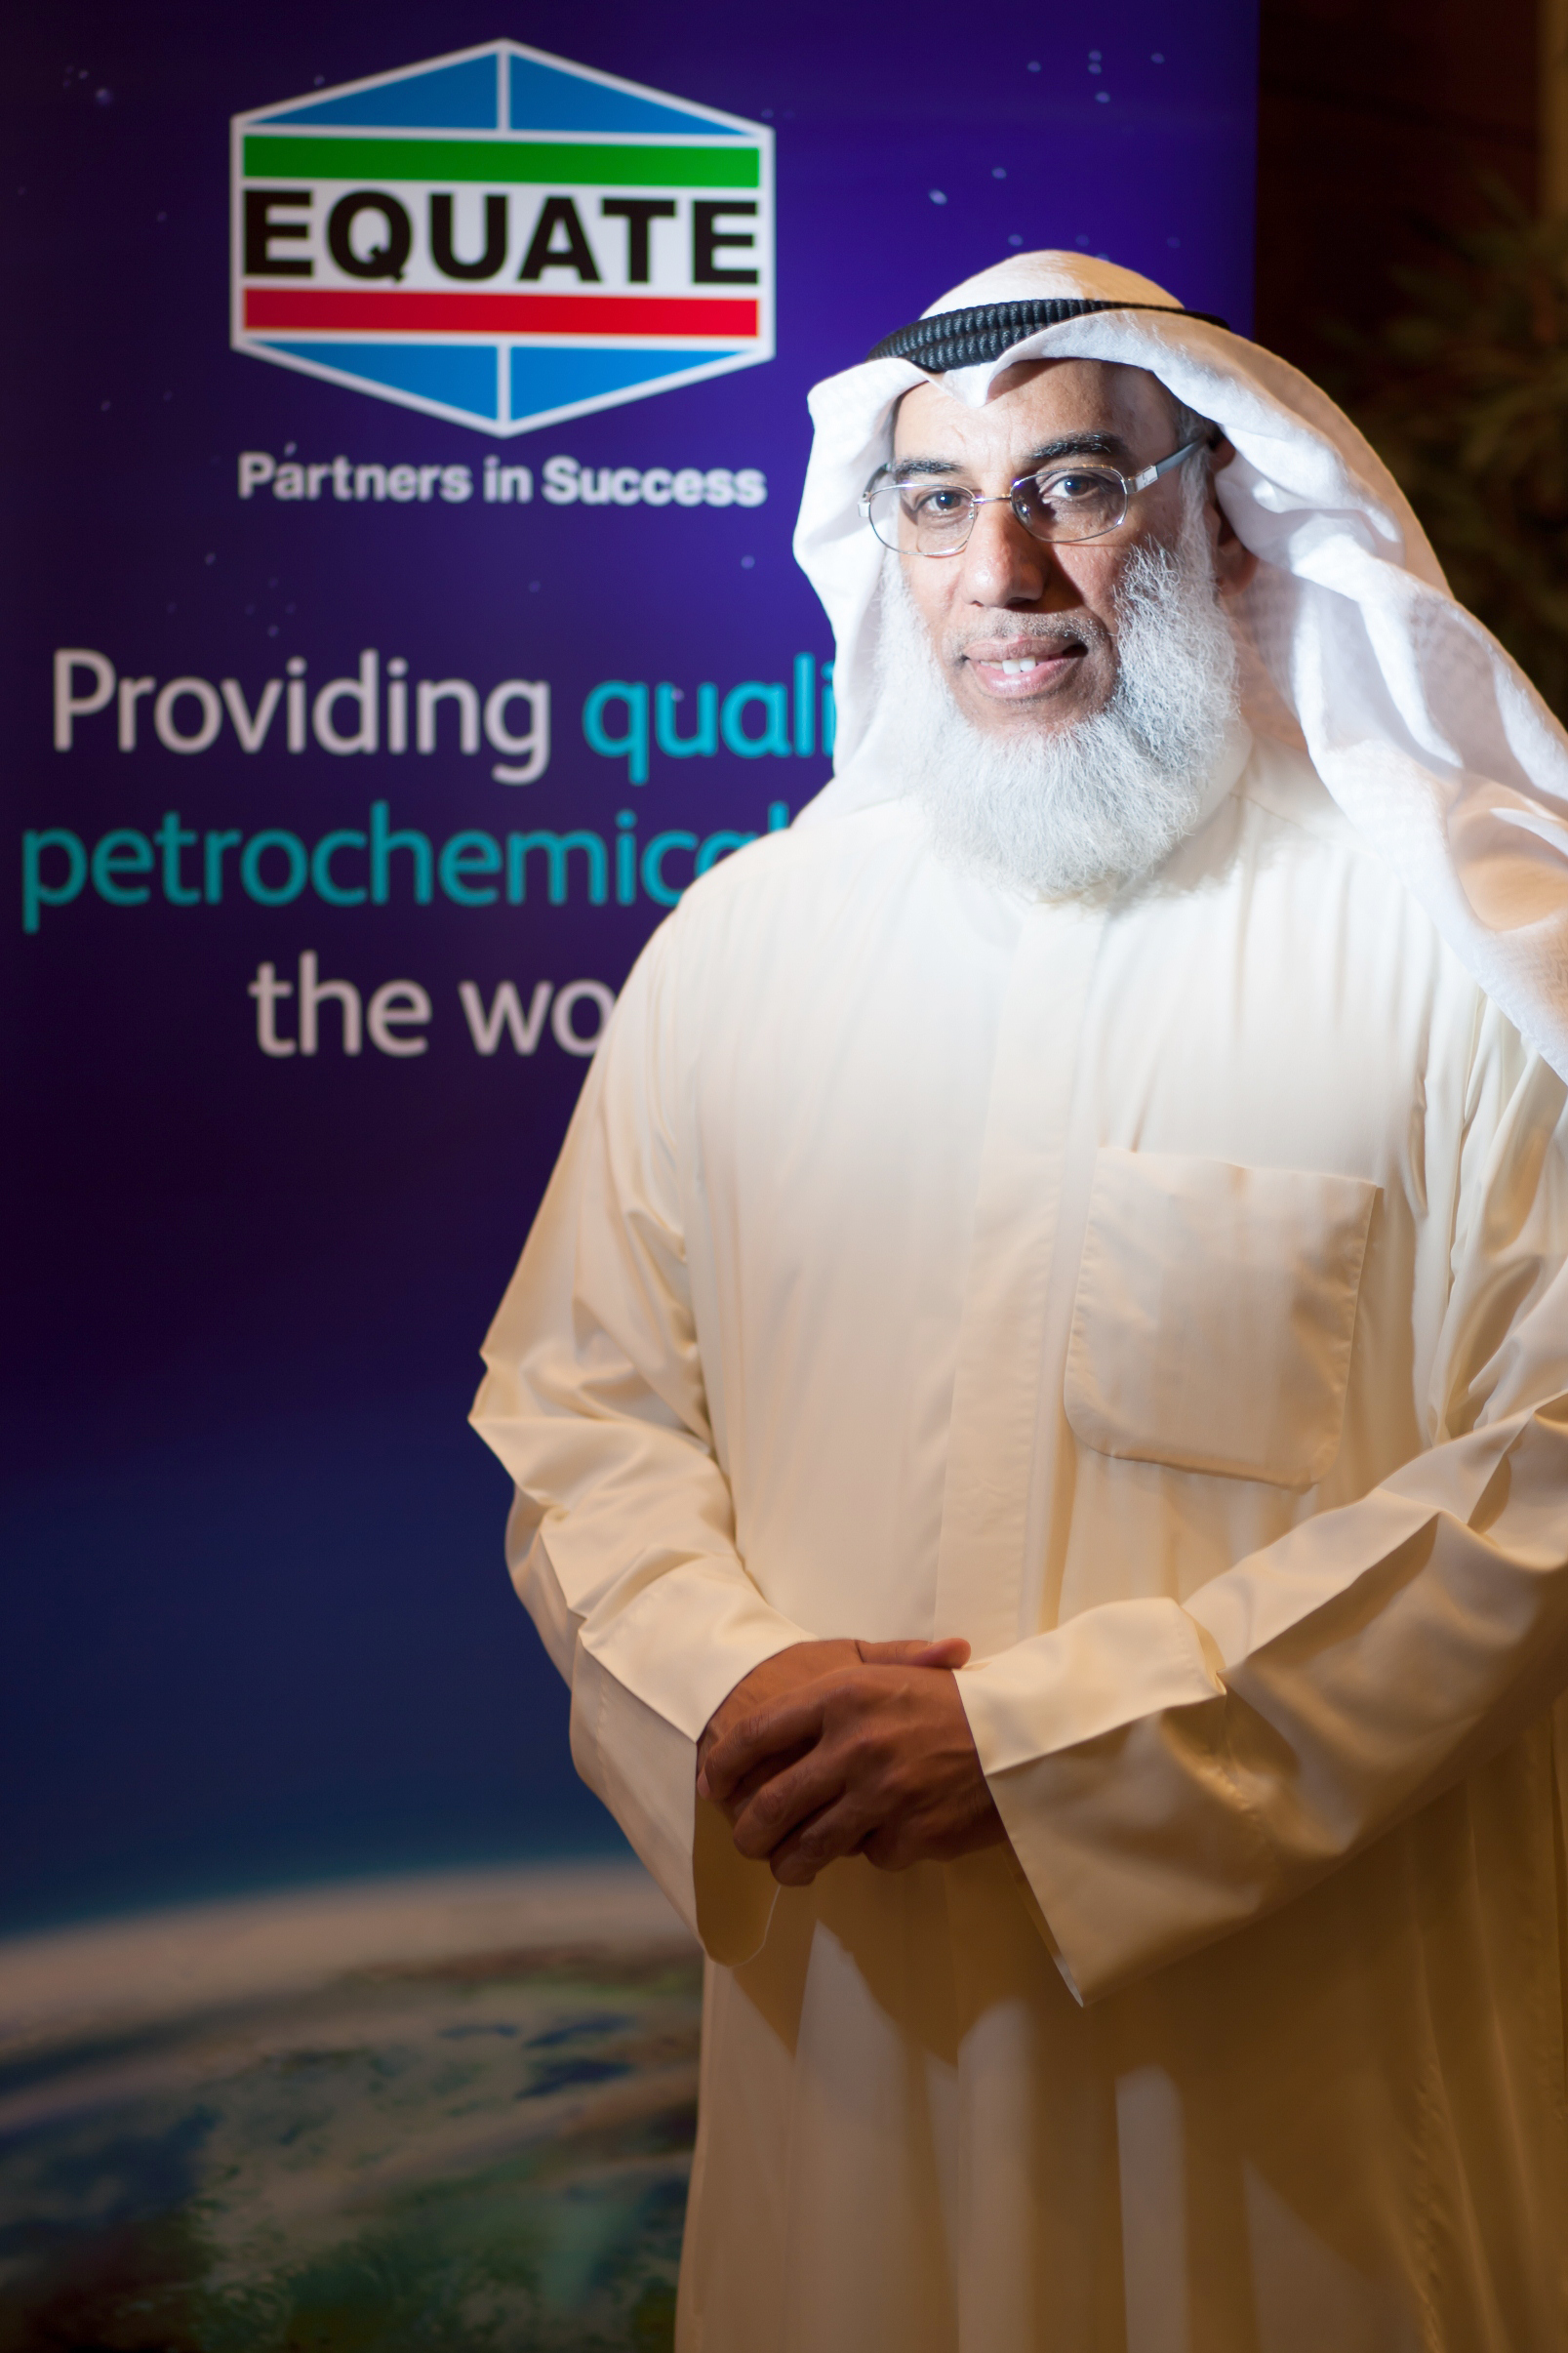 EQUATE President and CEO Mohammad Husain